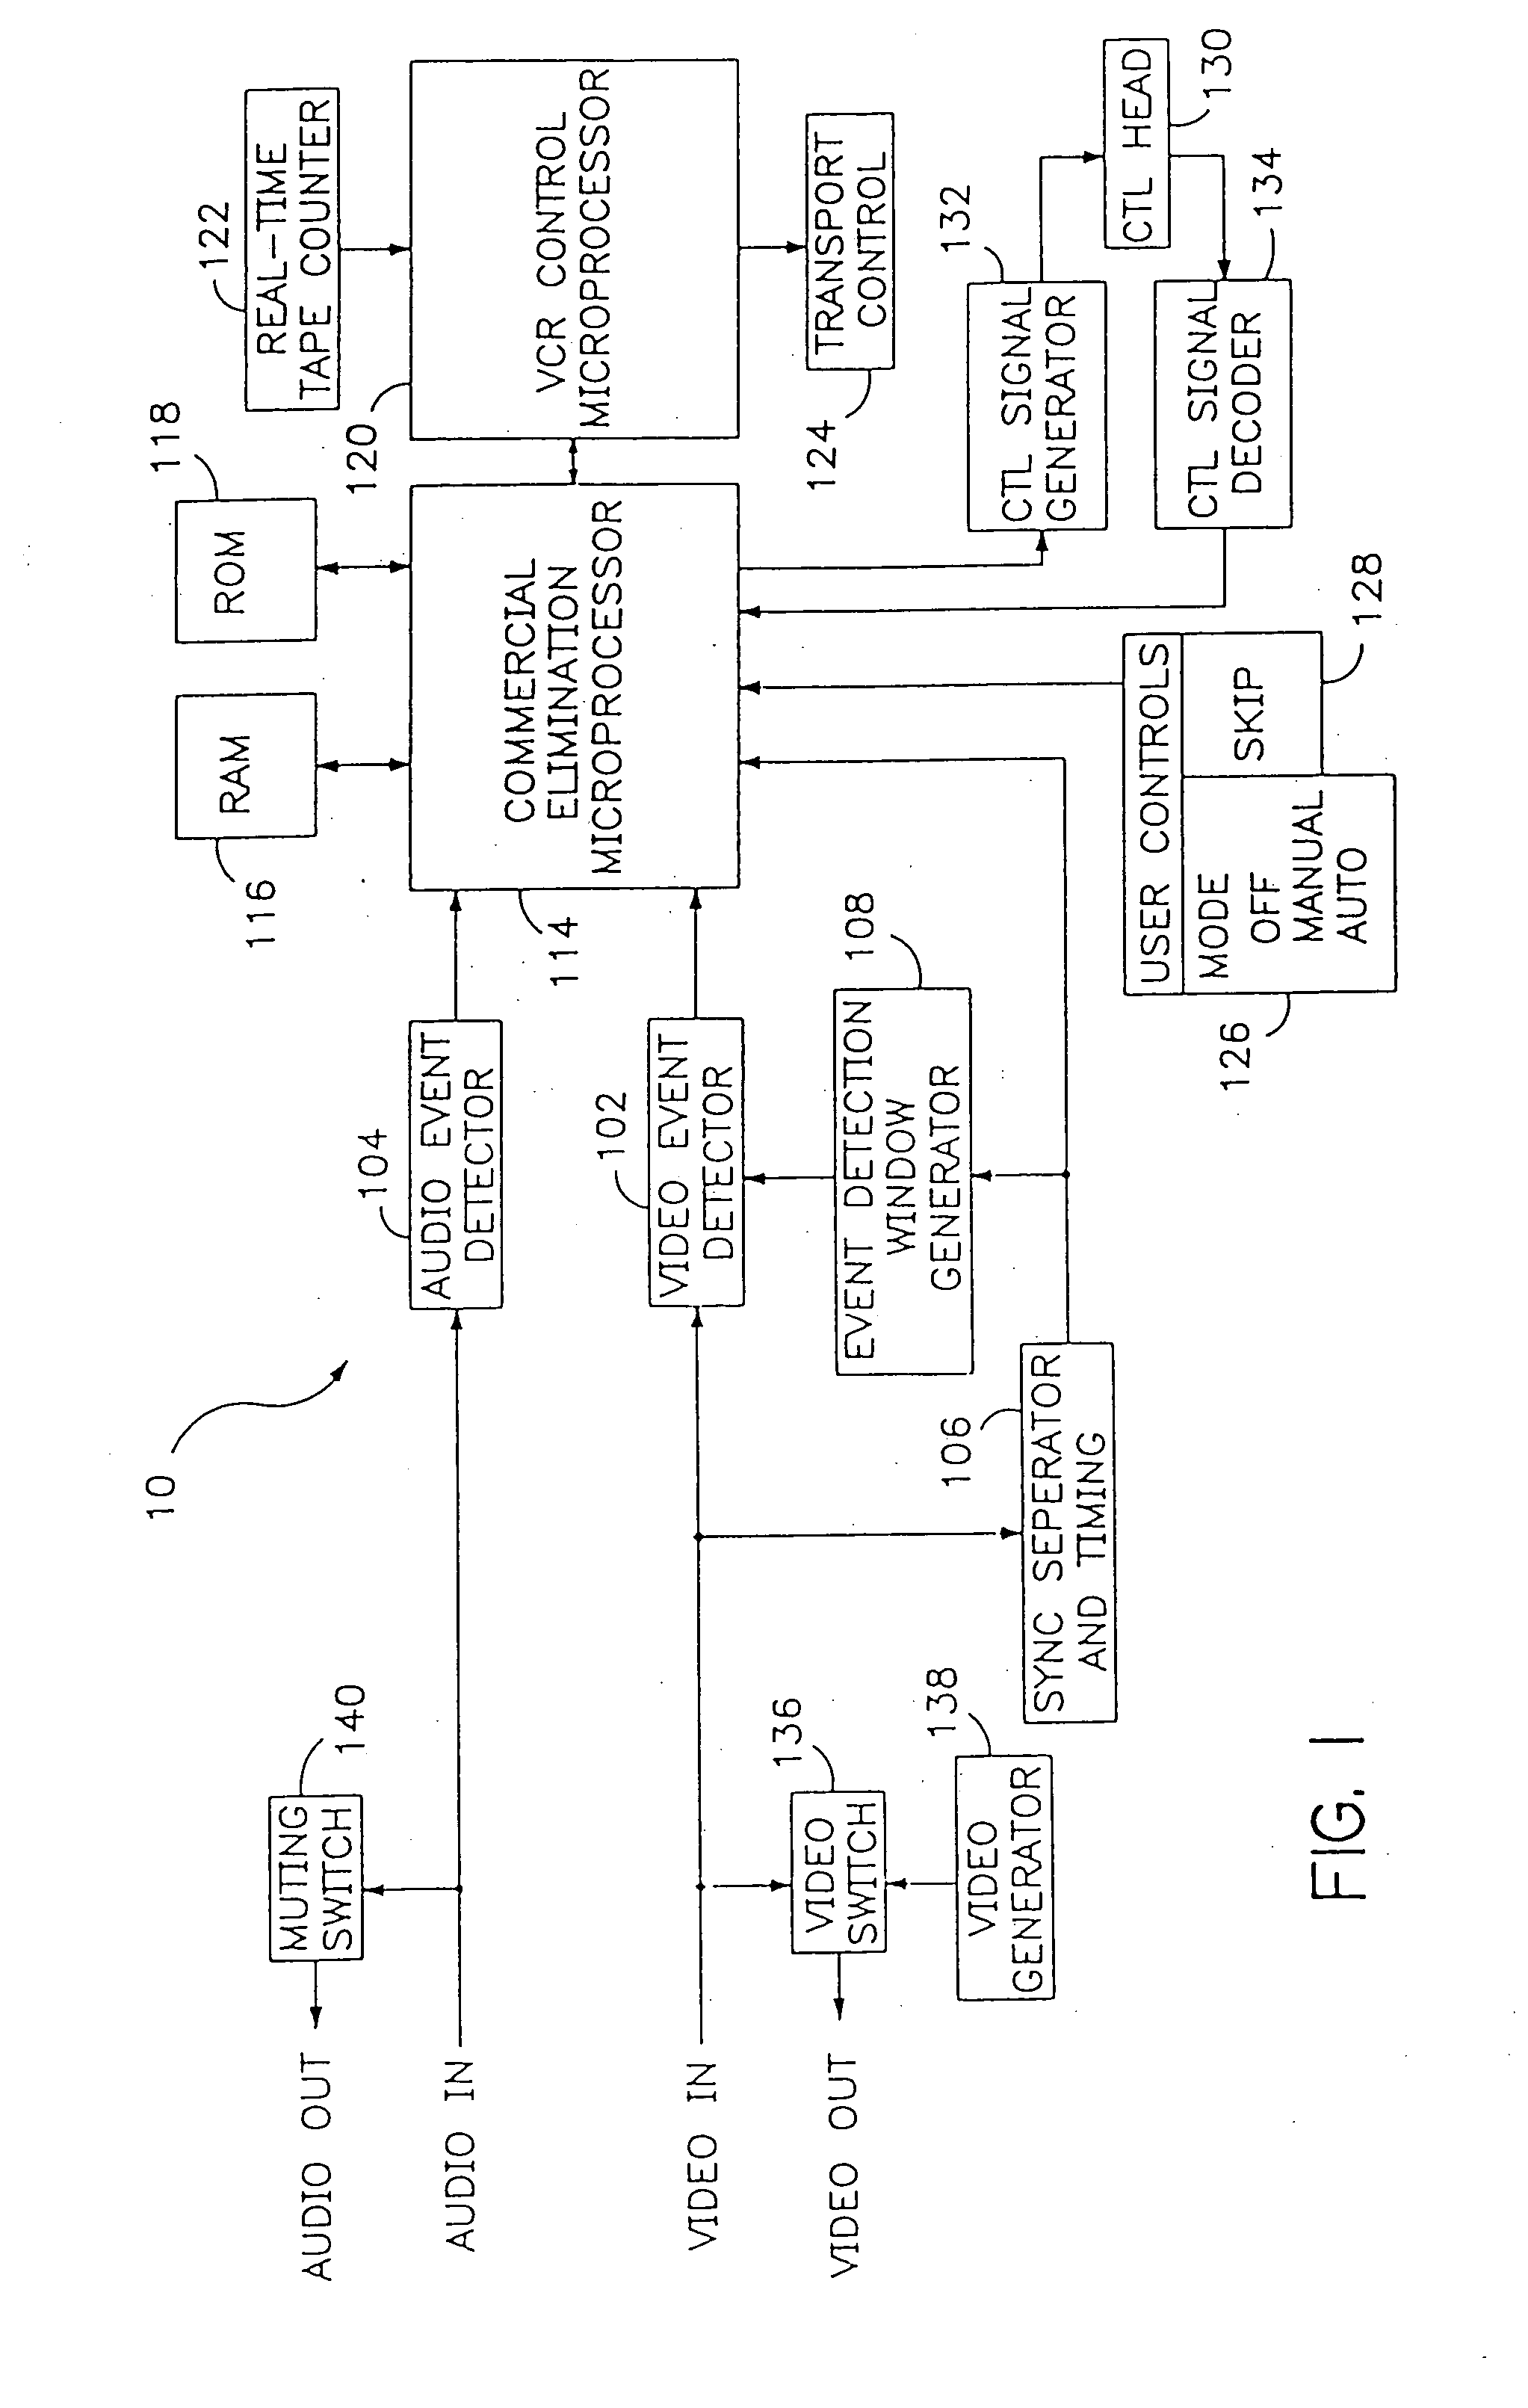 Method and apparatus for selectively playing segments of a video recording